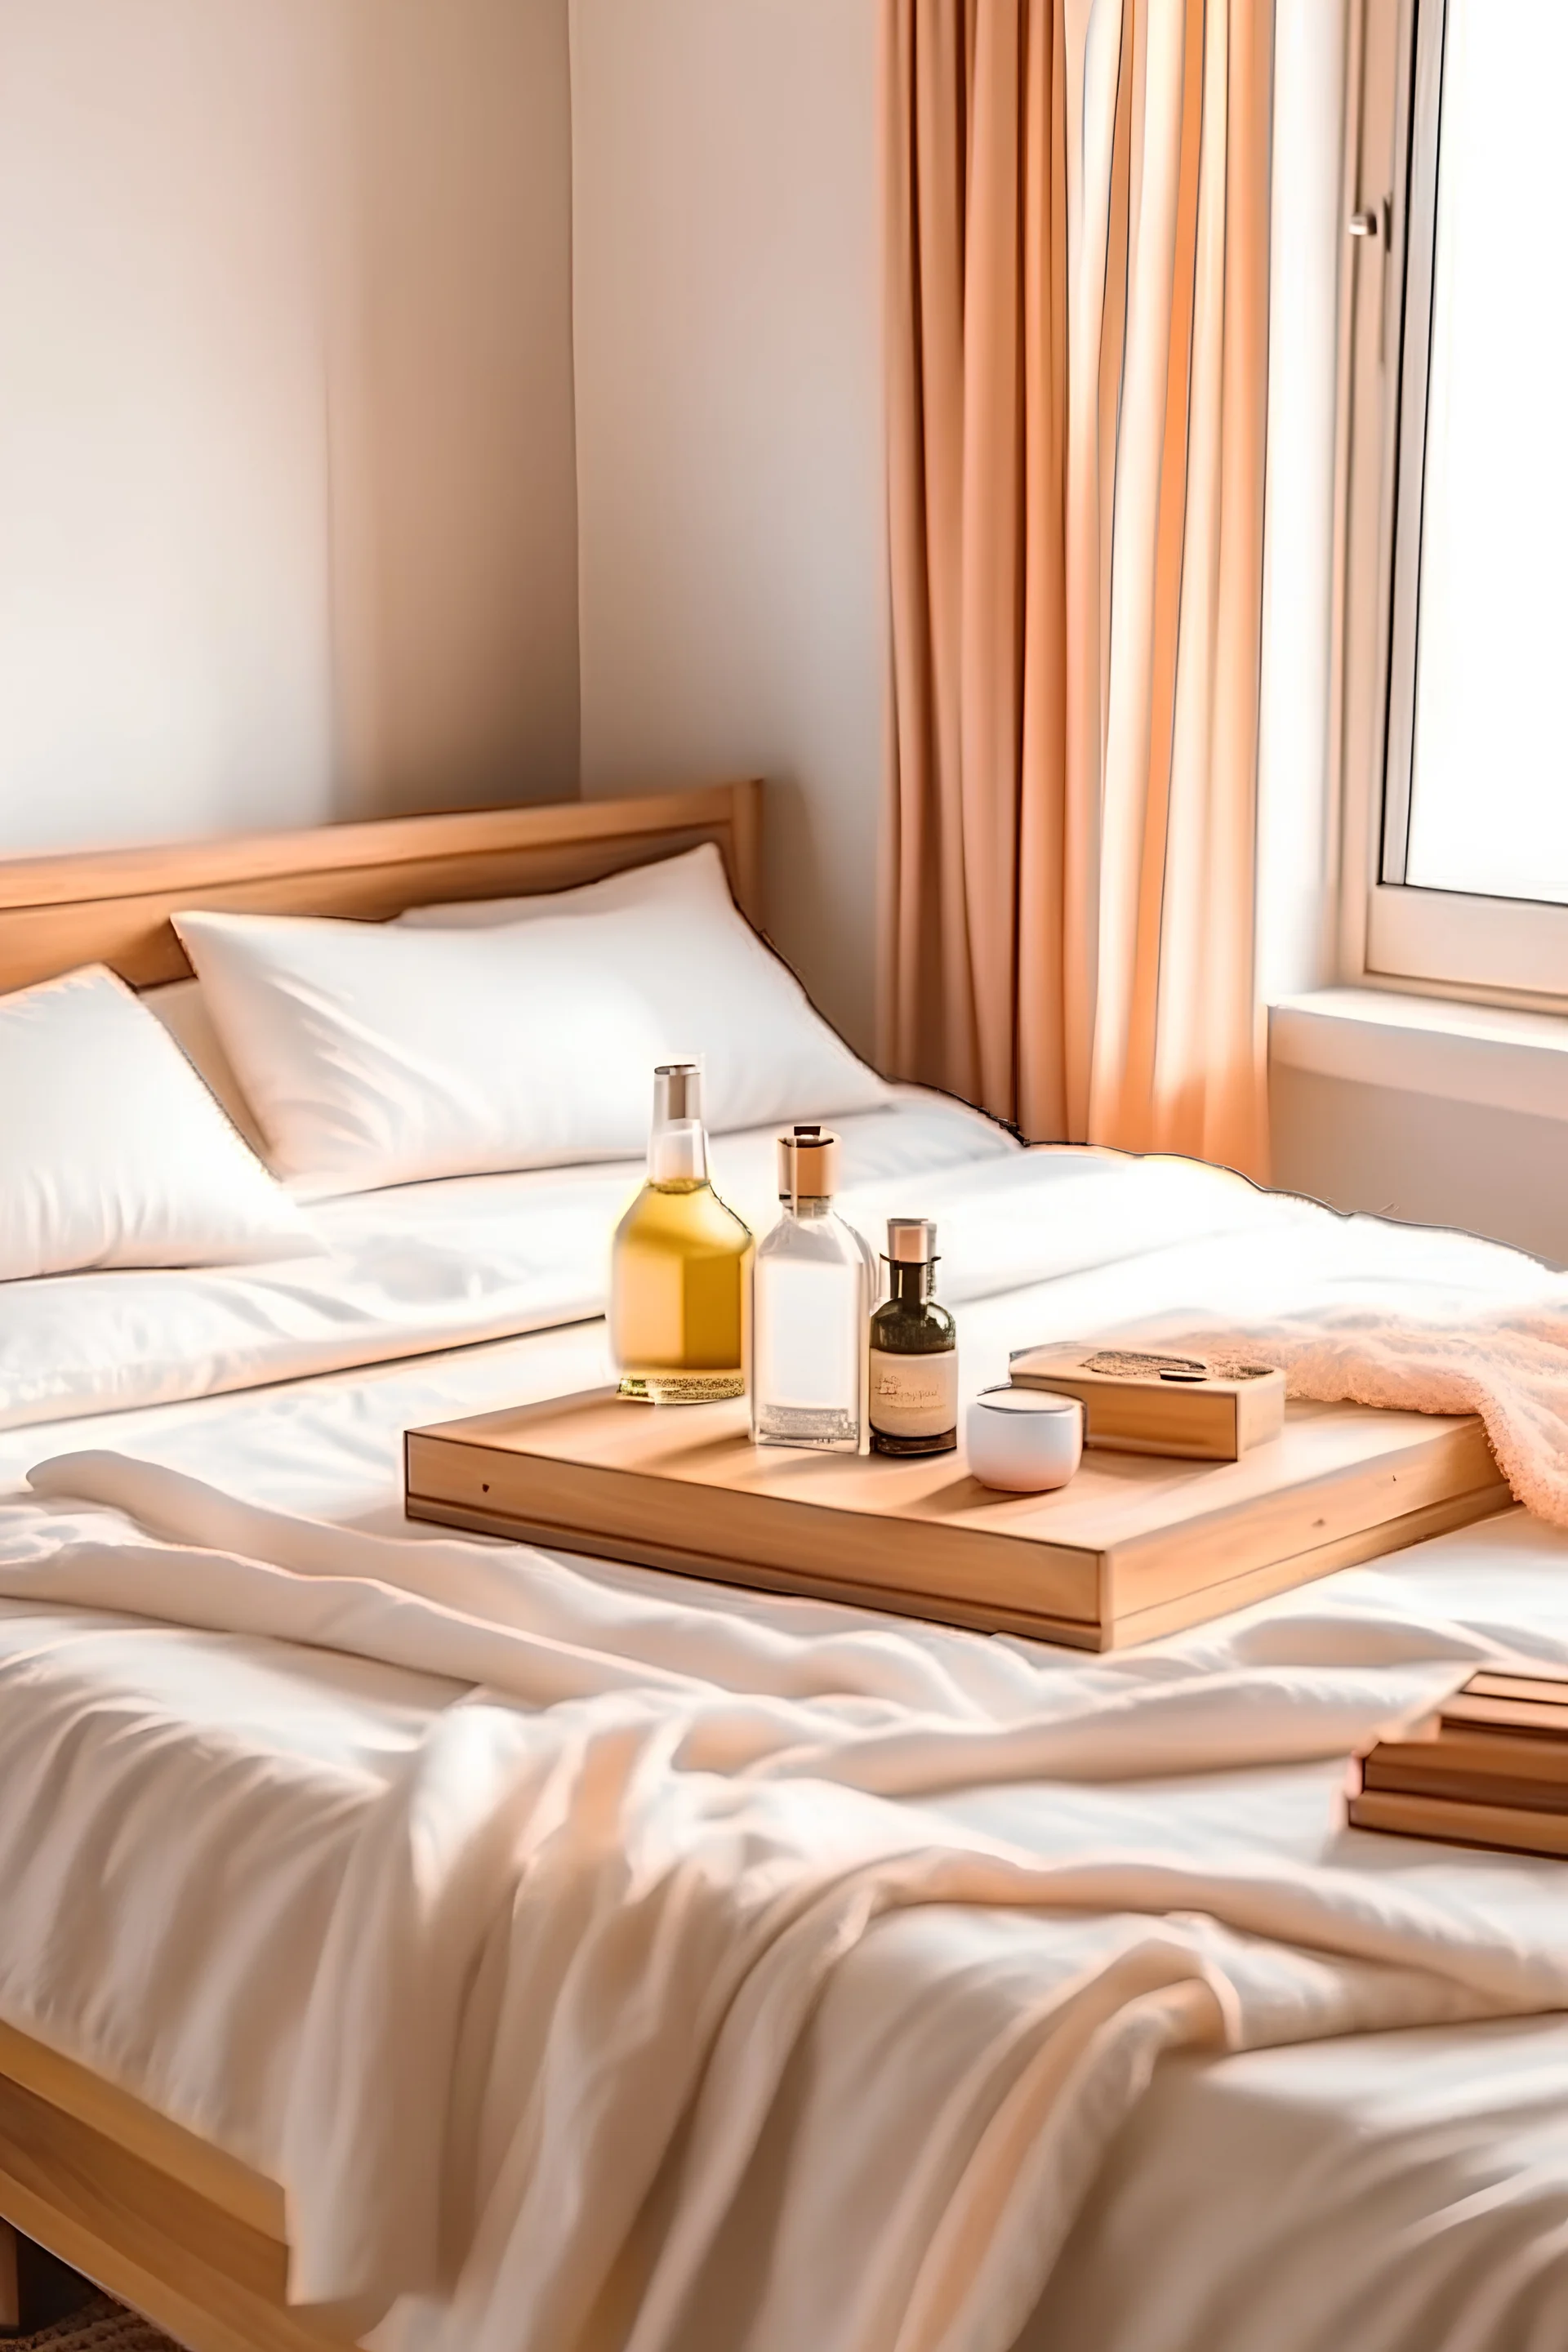 Bedroom with a light summer quilt in beige. Pillow . A table of wood with a toothbrush. And one box of perfume